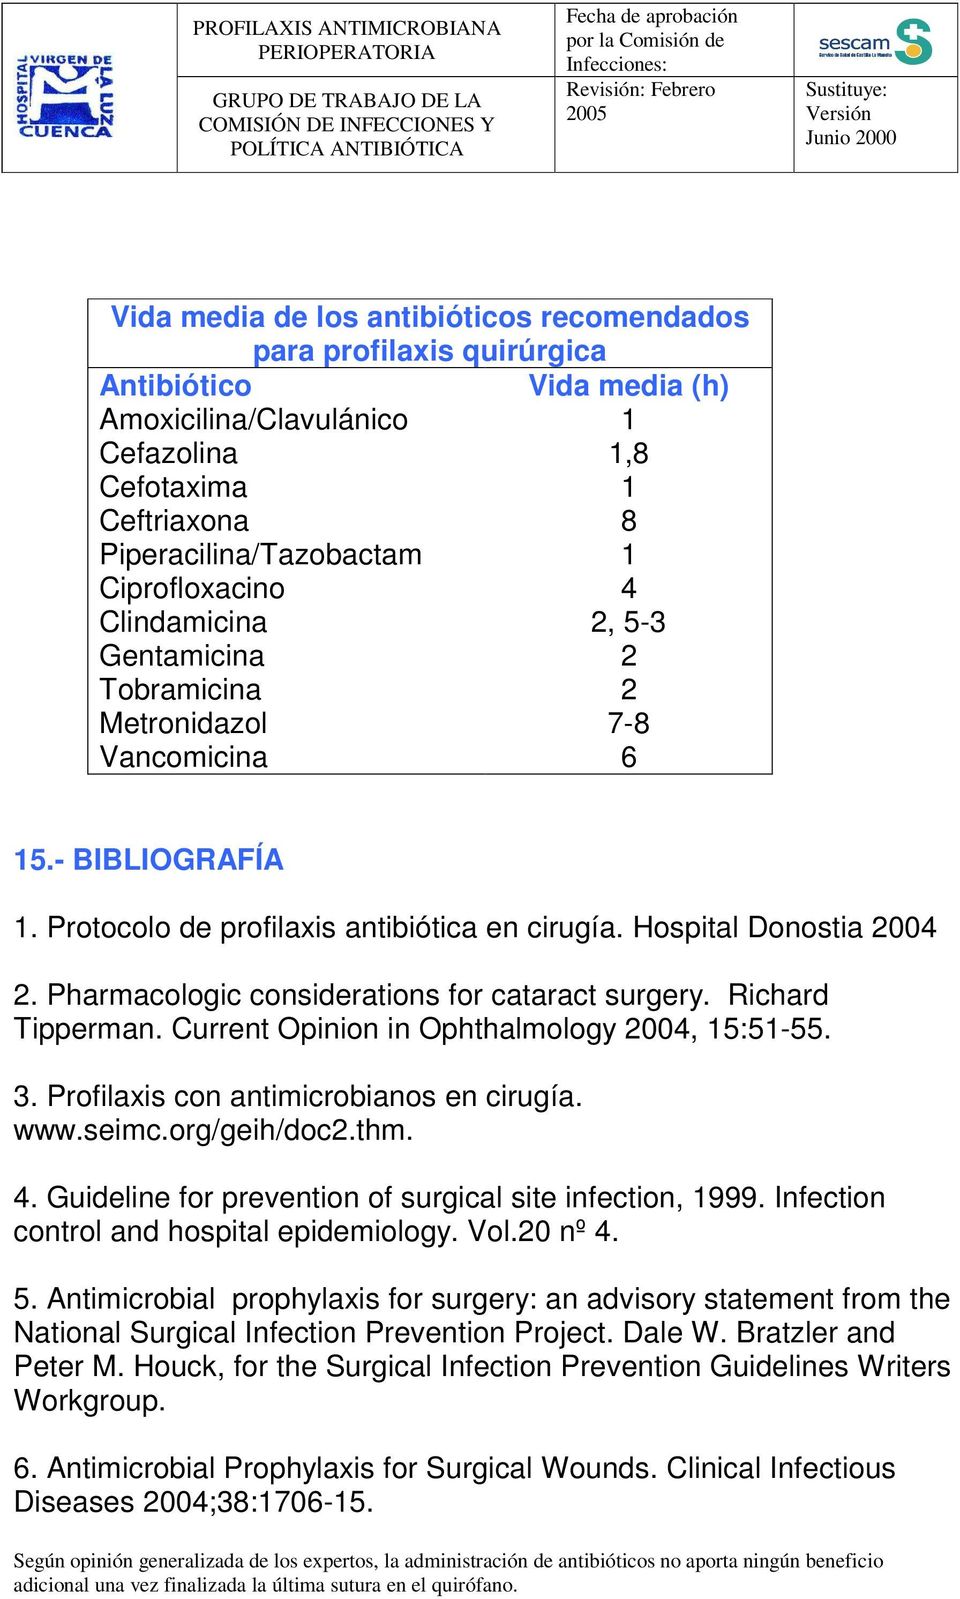 Pharmacologic considerations for cataract surgery. Richard Tipperman. Current Opinion in Ophthalmology 2004, 15:51-55. 3. Profilaxis con antimicrobianos en cirugía. www.seimc.org/geih/doc2.thm. 4.